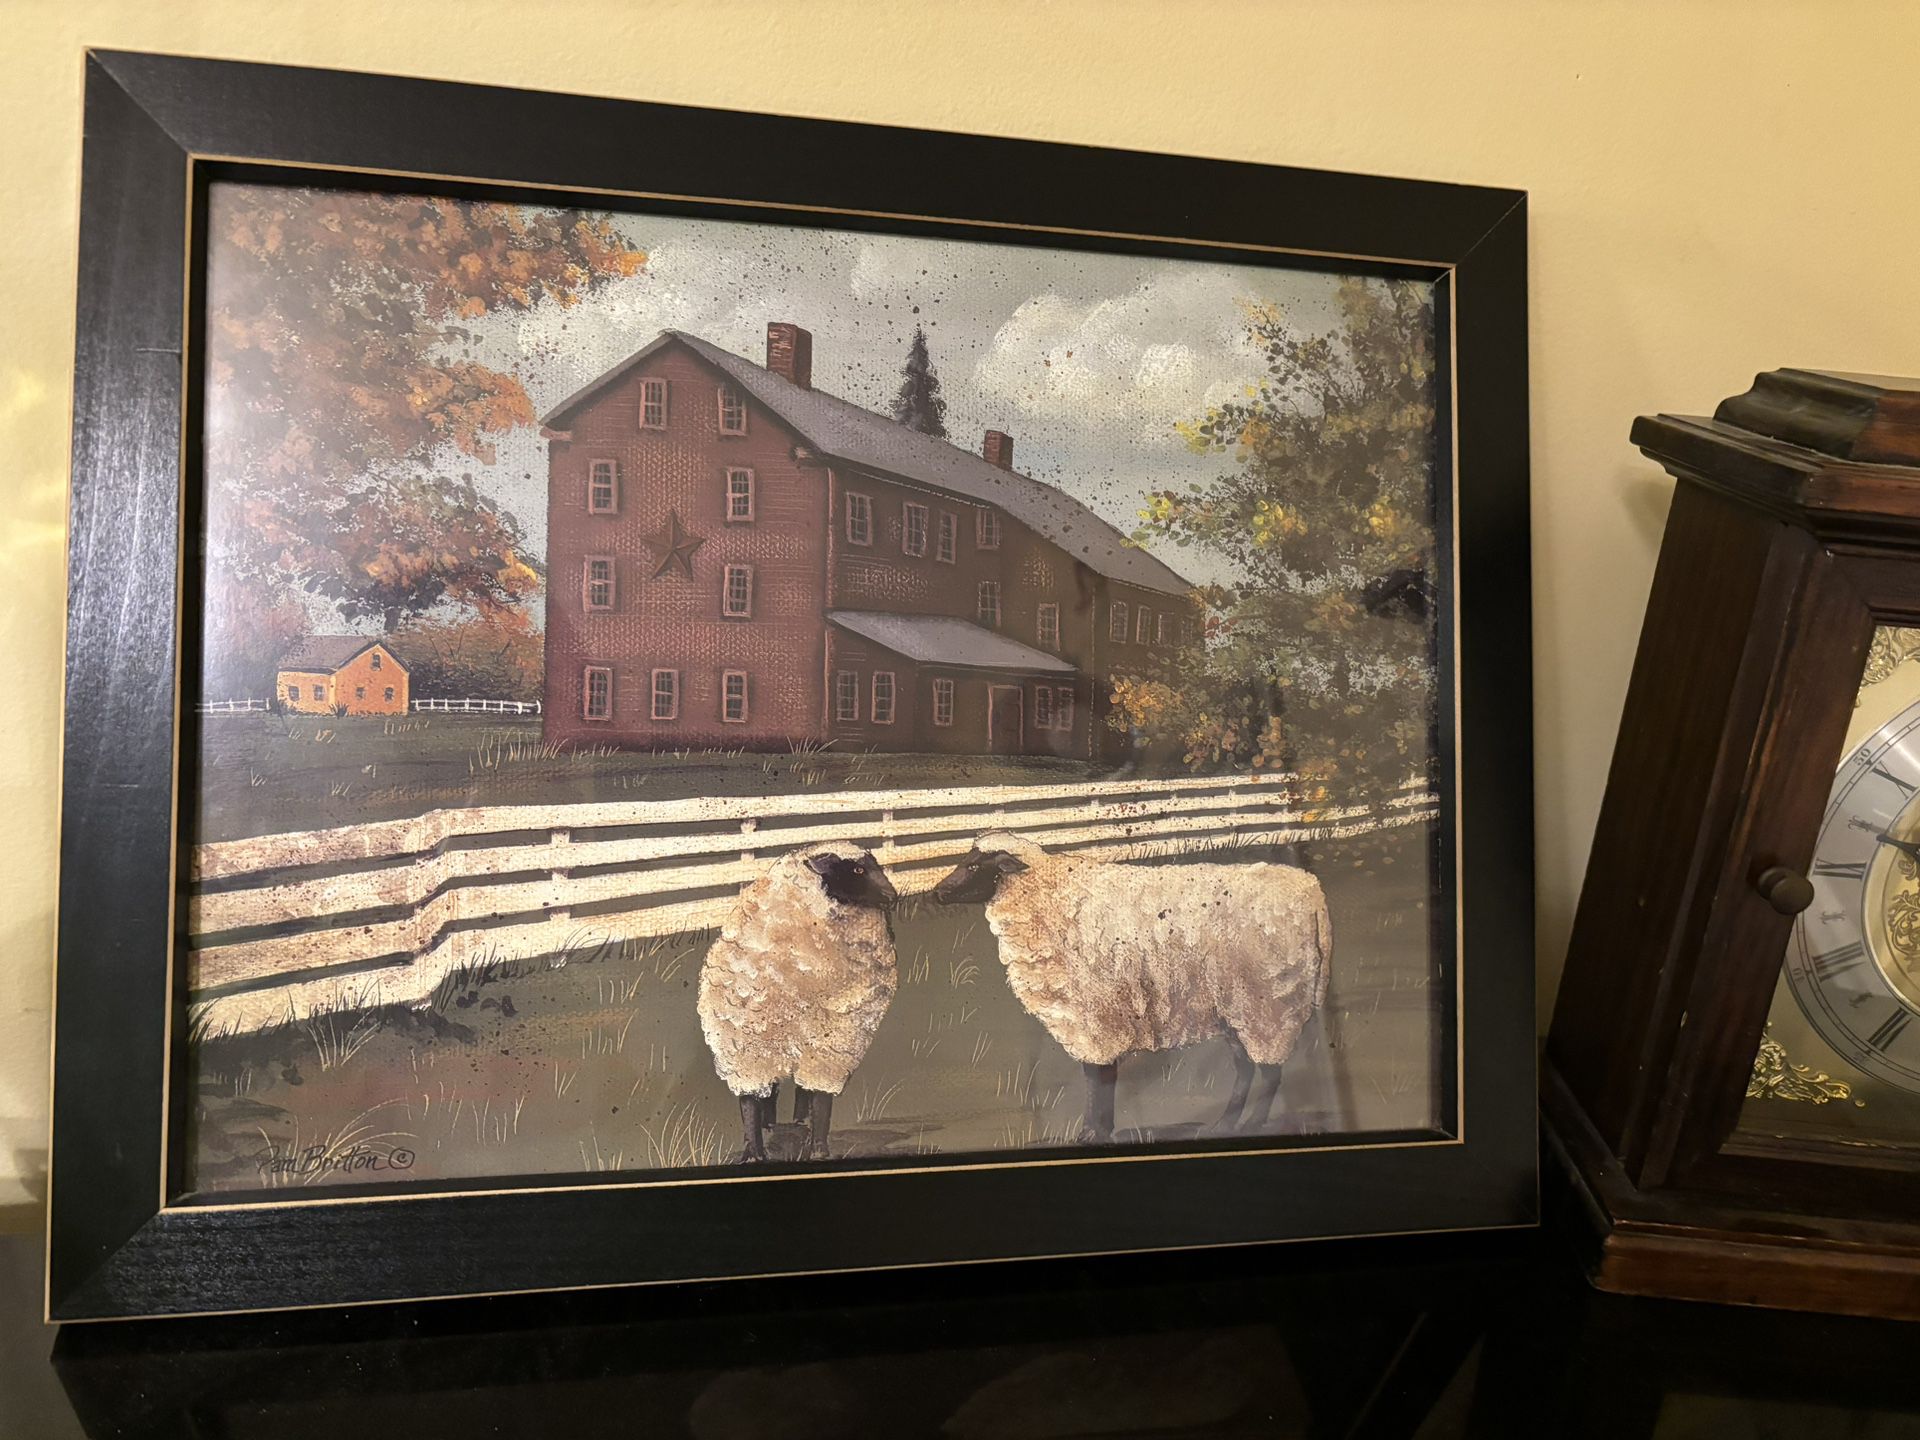 TrendyDecor4U BR129-405 Hancock Sheep by Pam Britton 18x 14in. Printed Framed Wall Art